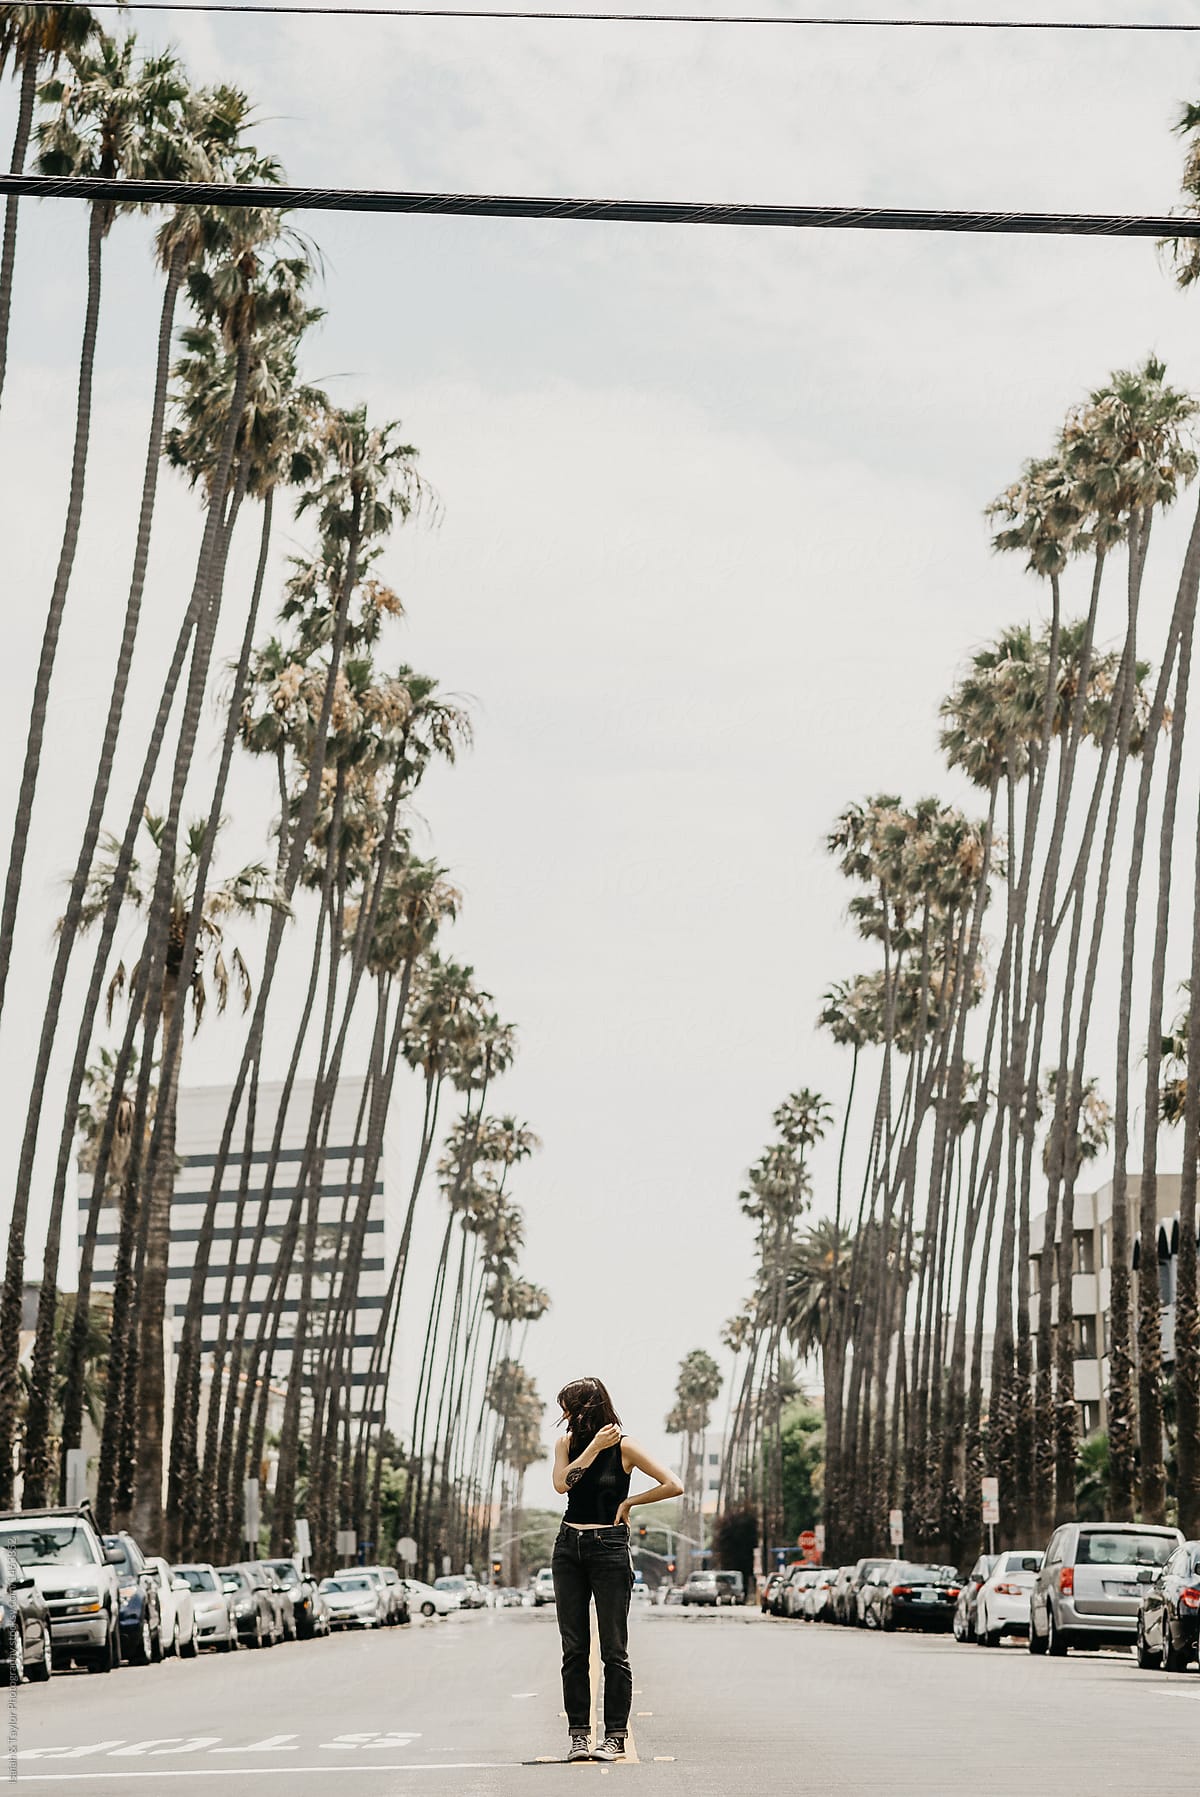 Small woman standing in the middle of a neighborhood street framed by palm trees